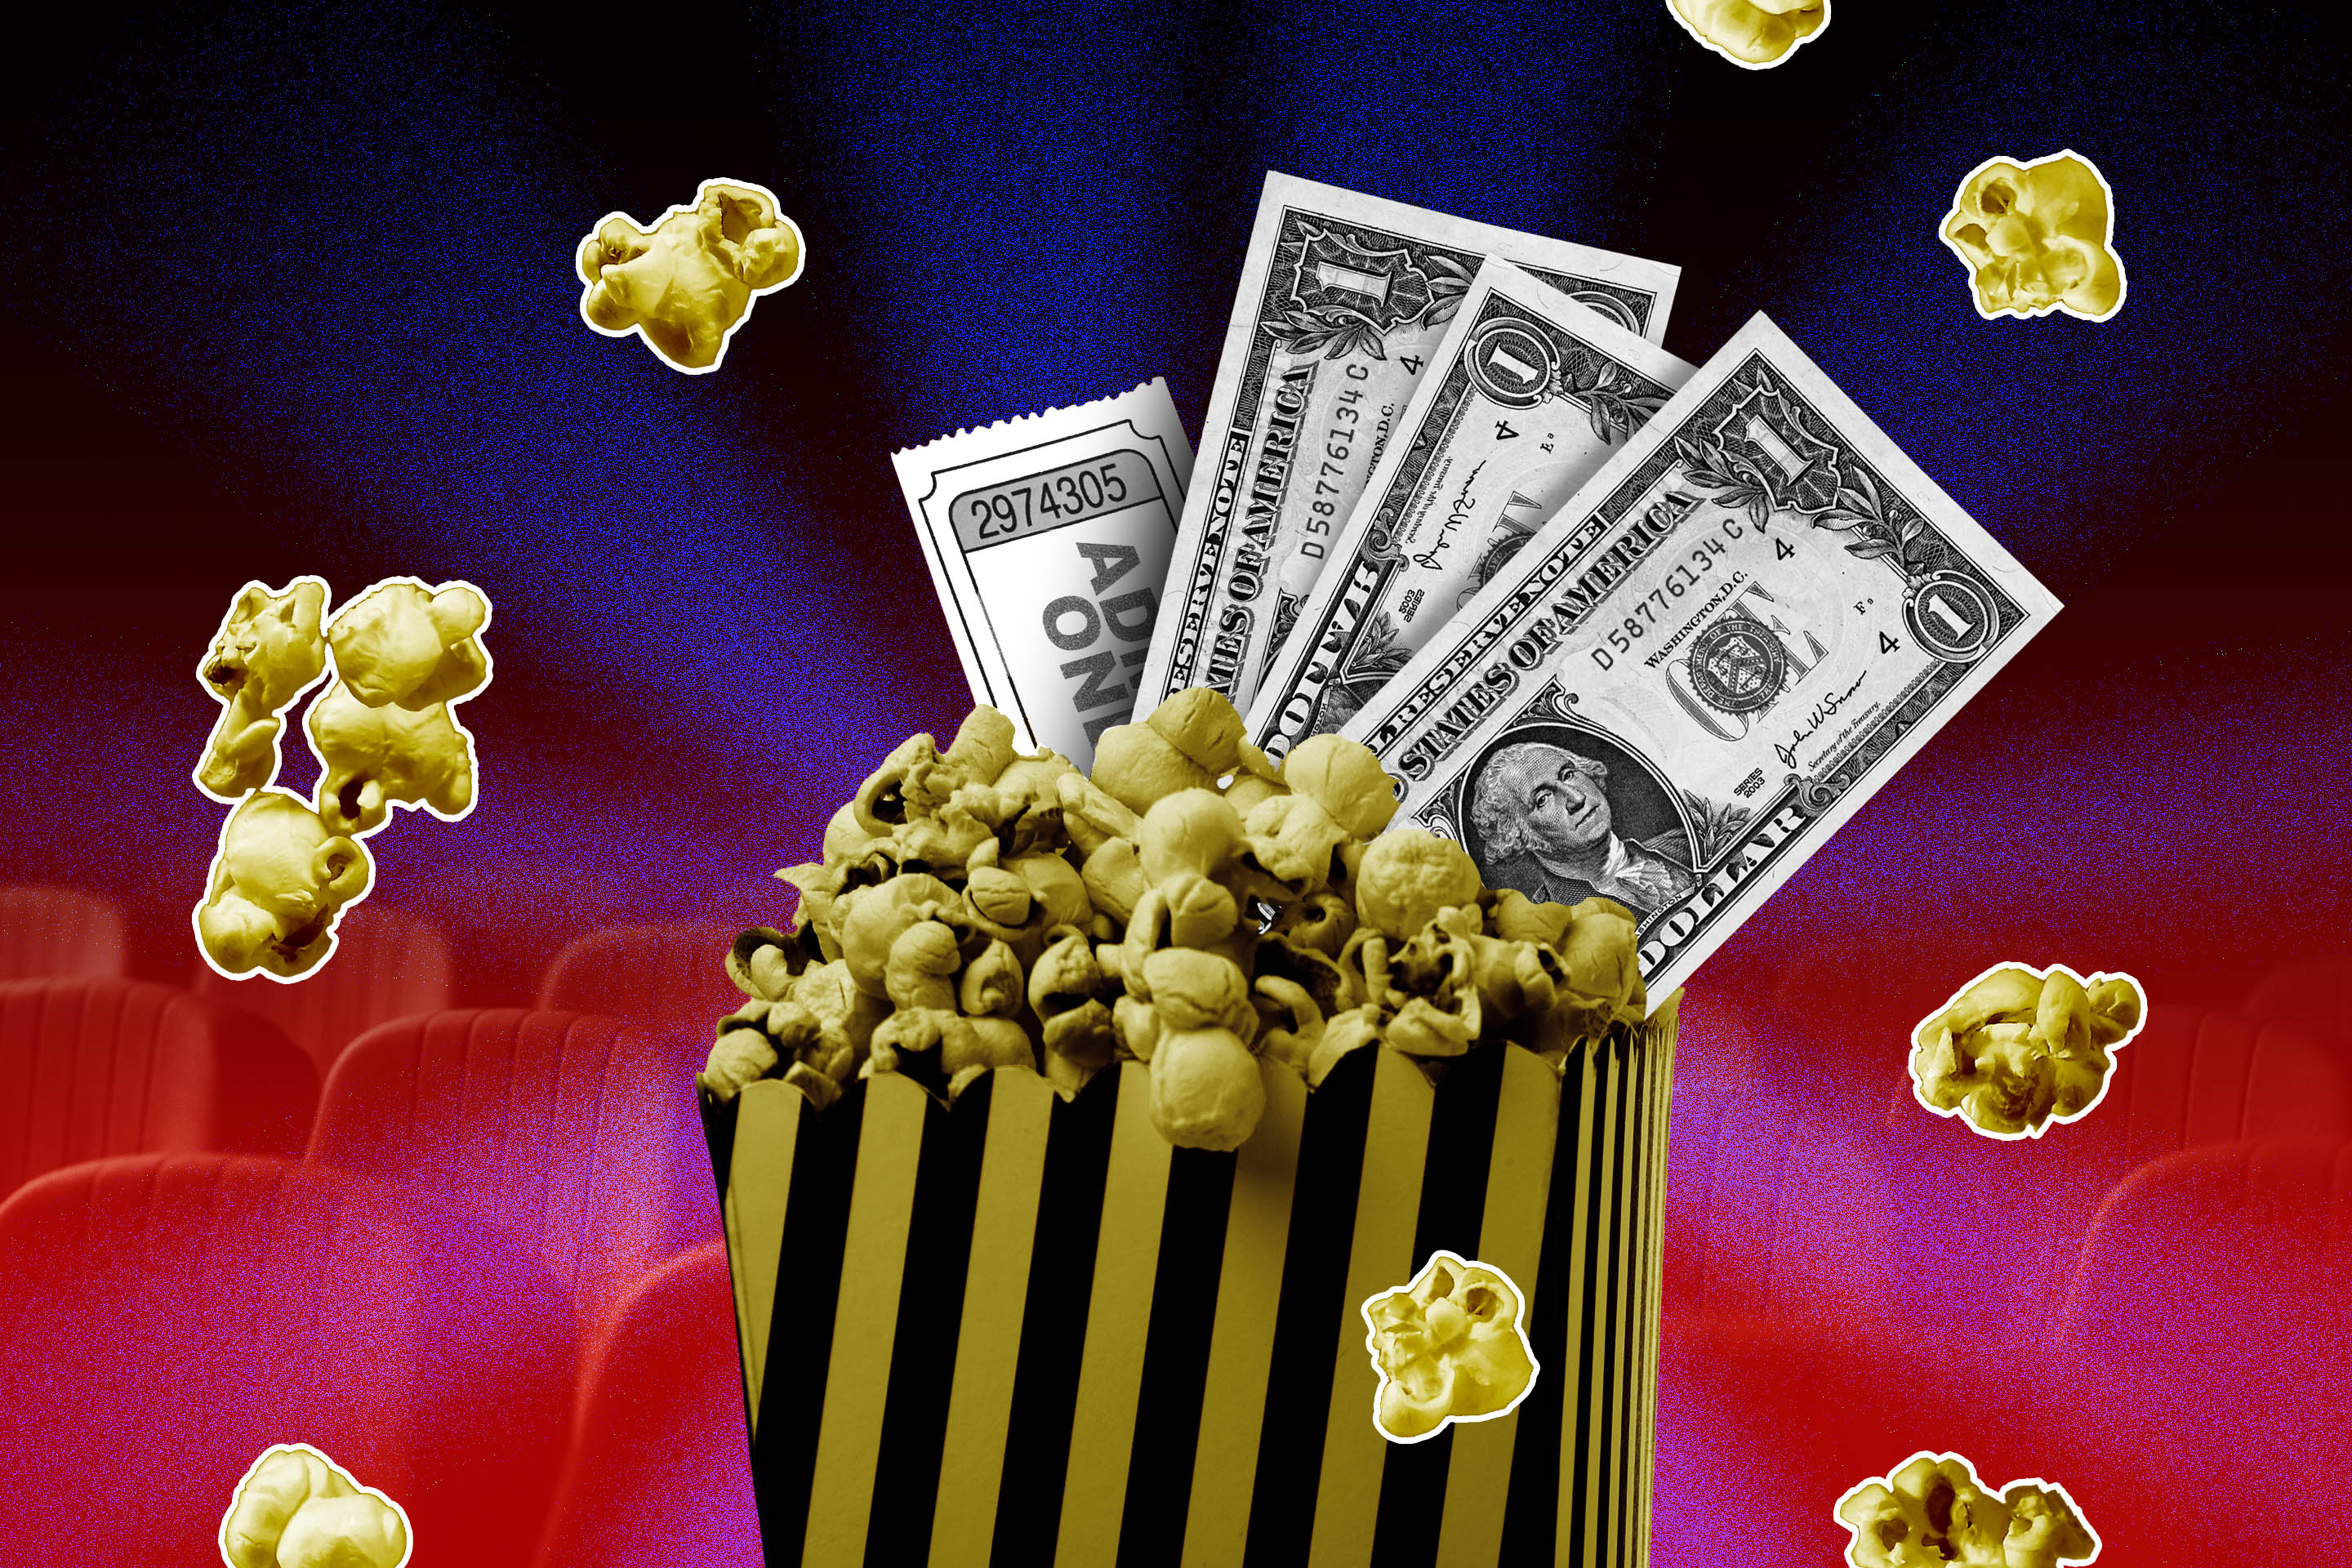 Why Movie Tickets Are Only $3 This Weekend at Many U.S. Theaters